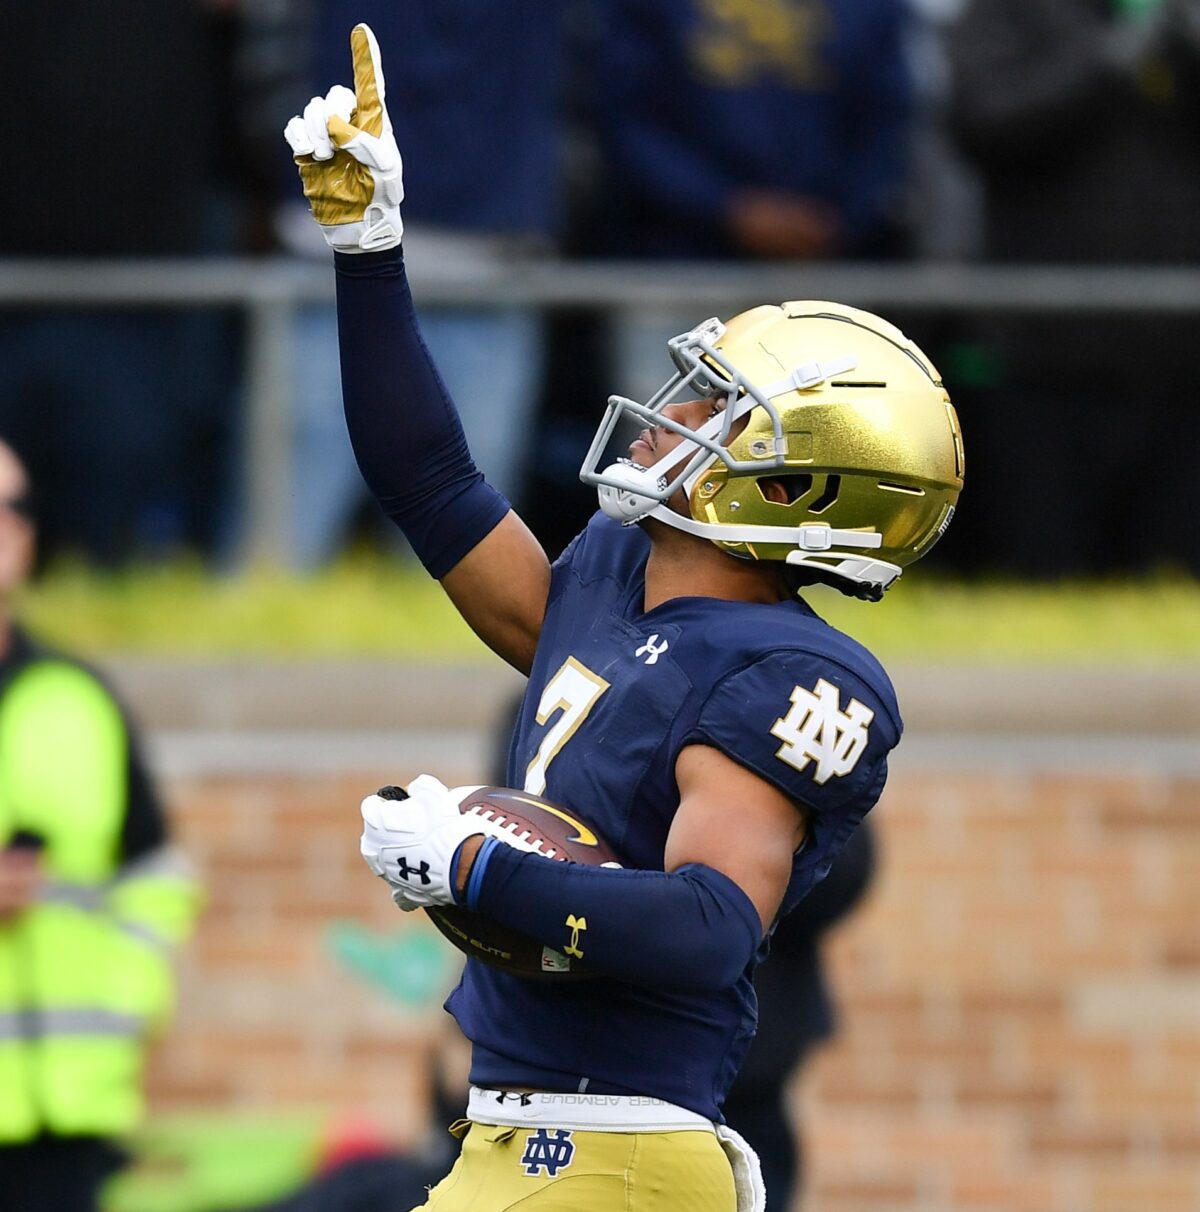 Notre Dame football: Mickey’s pick-six about much more than just football